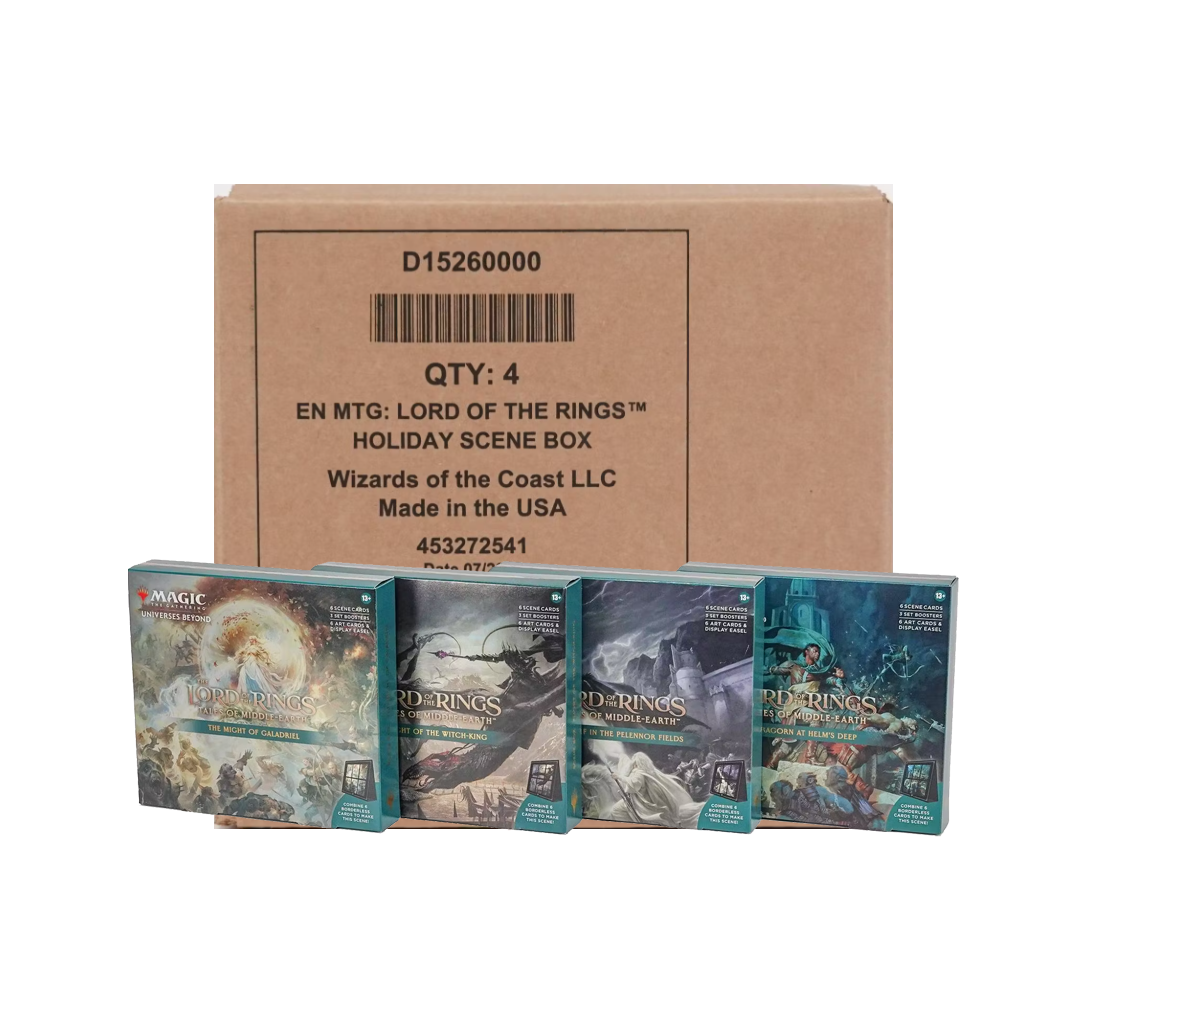 Magic the Gathering LOTR Holiday Tales of Middle earth Scene Box Set of 4